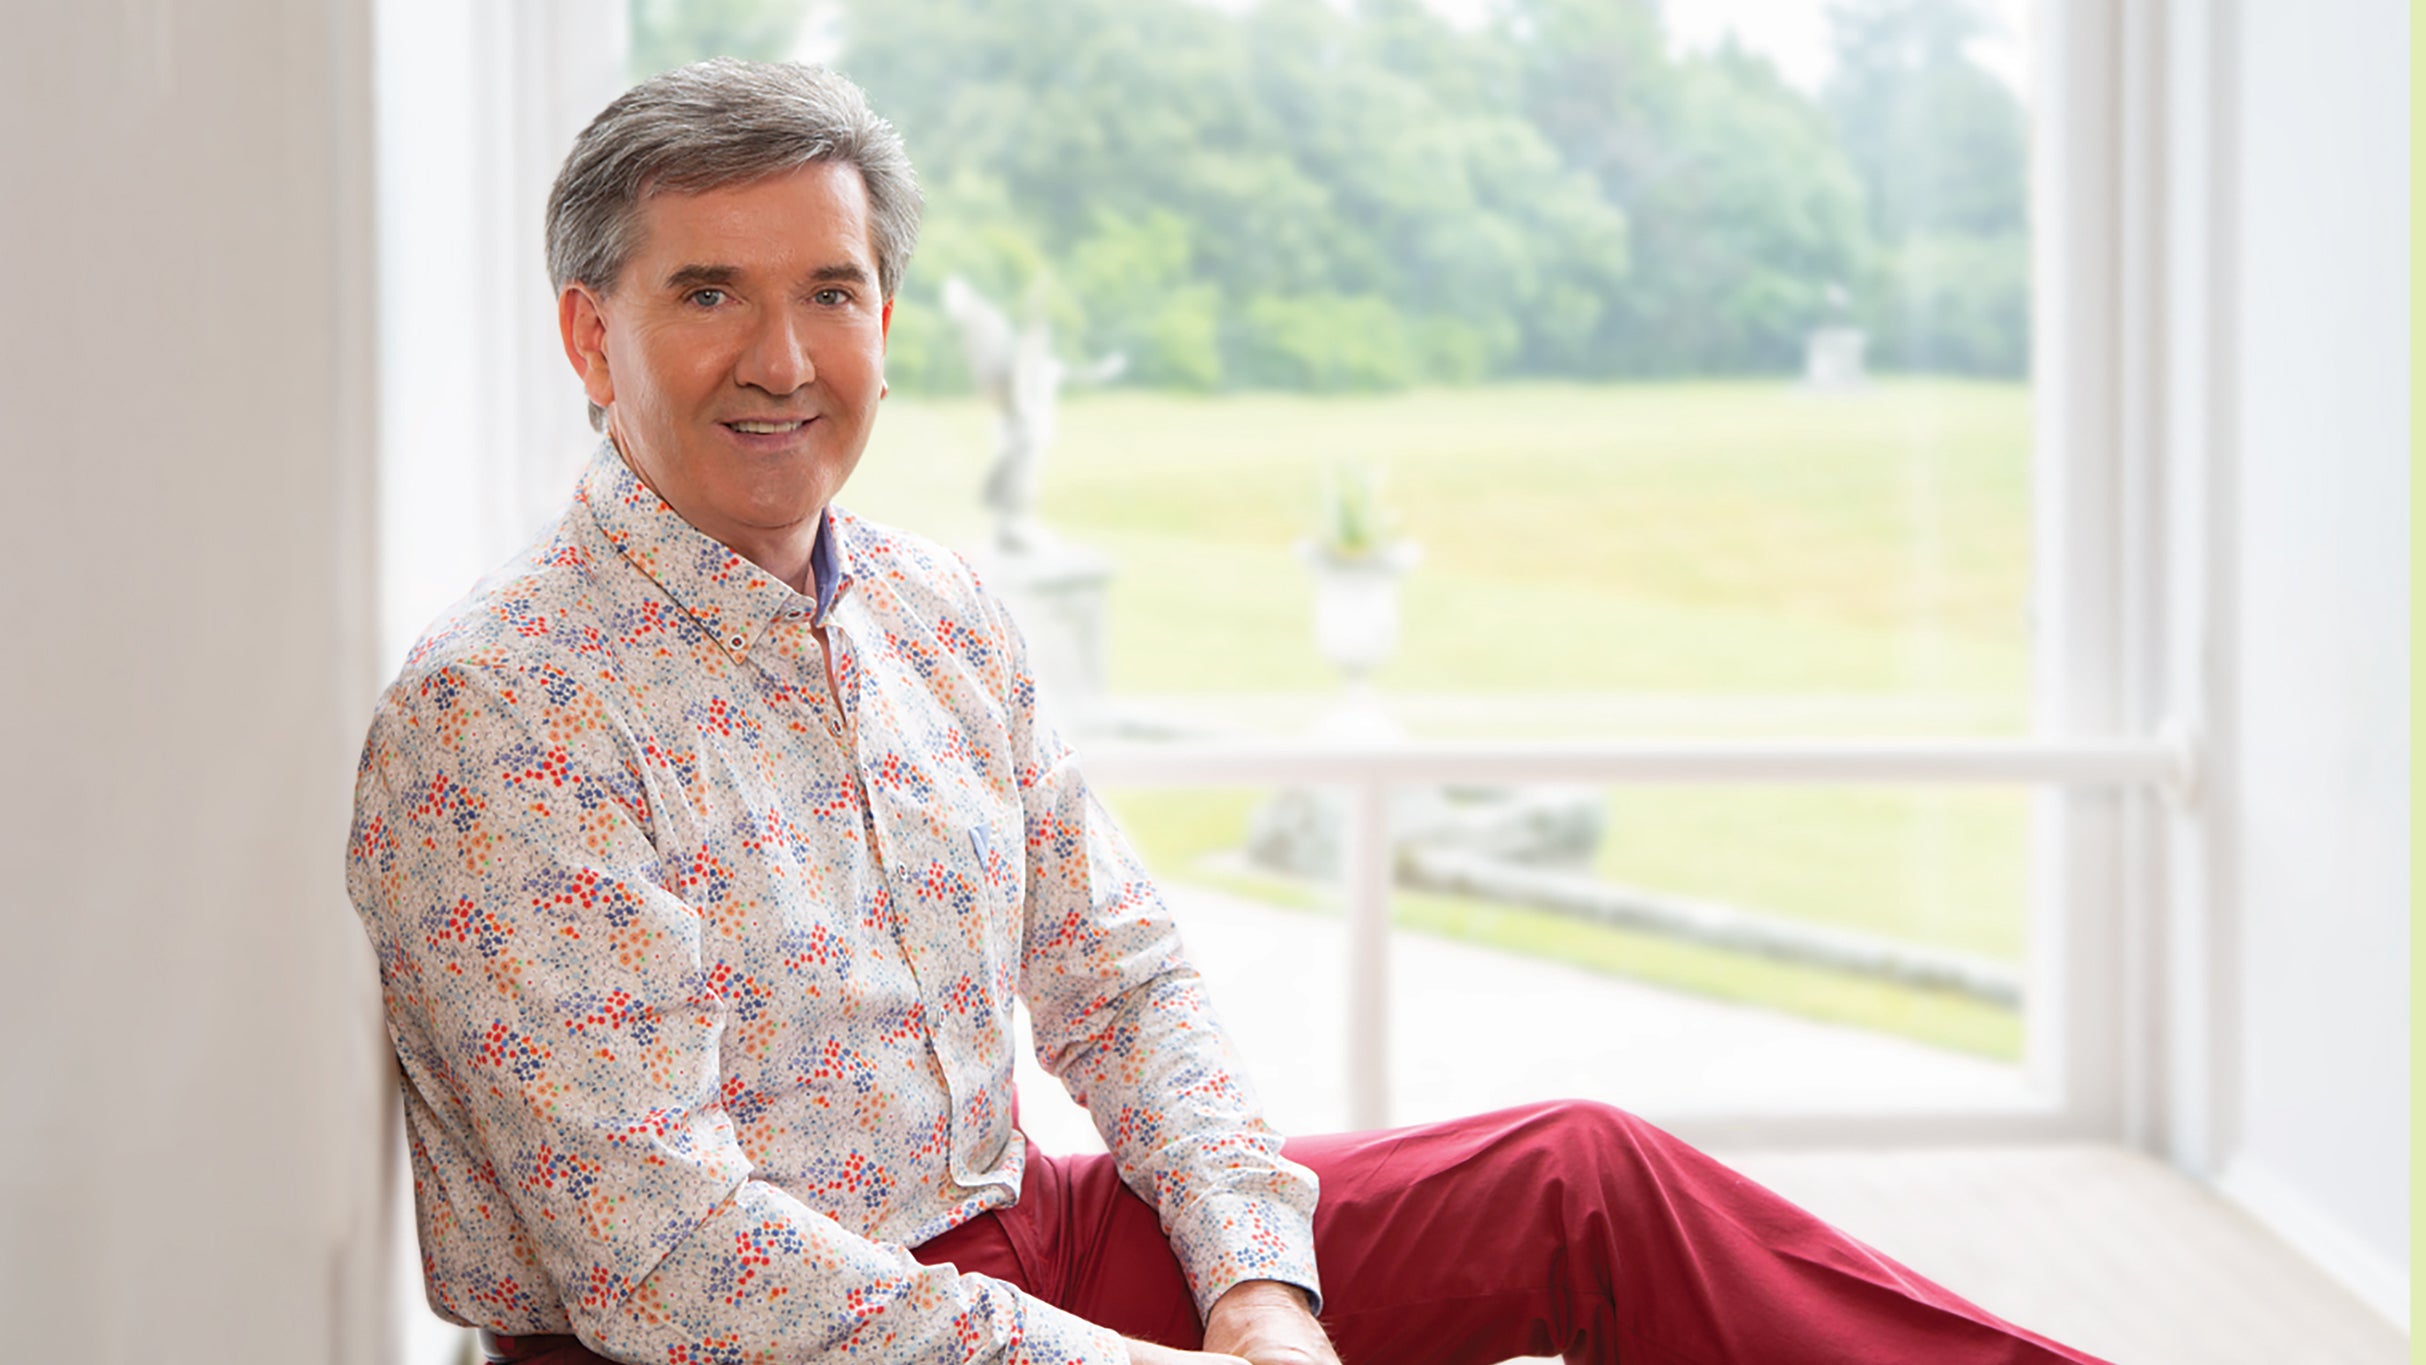 Daniel O'Donnell at Pabst Theater